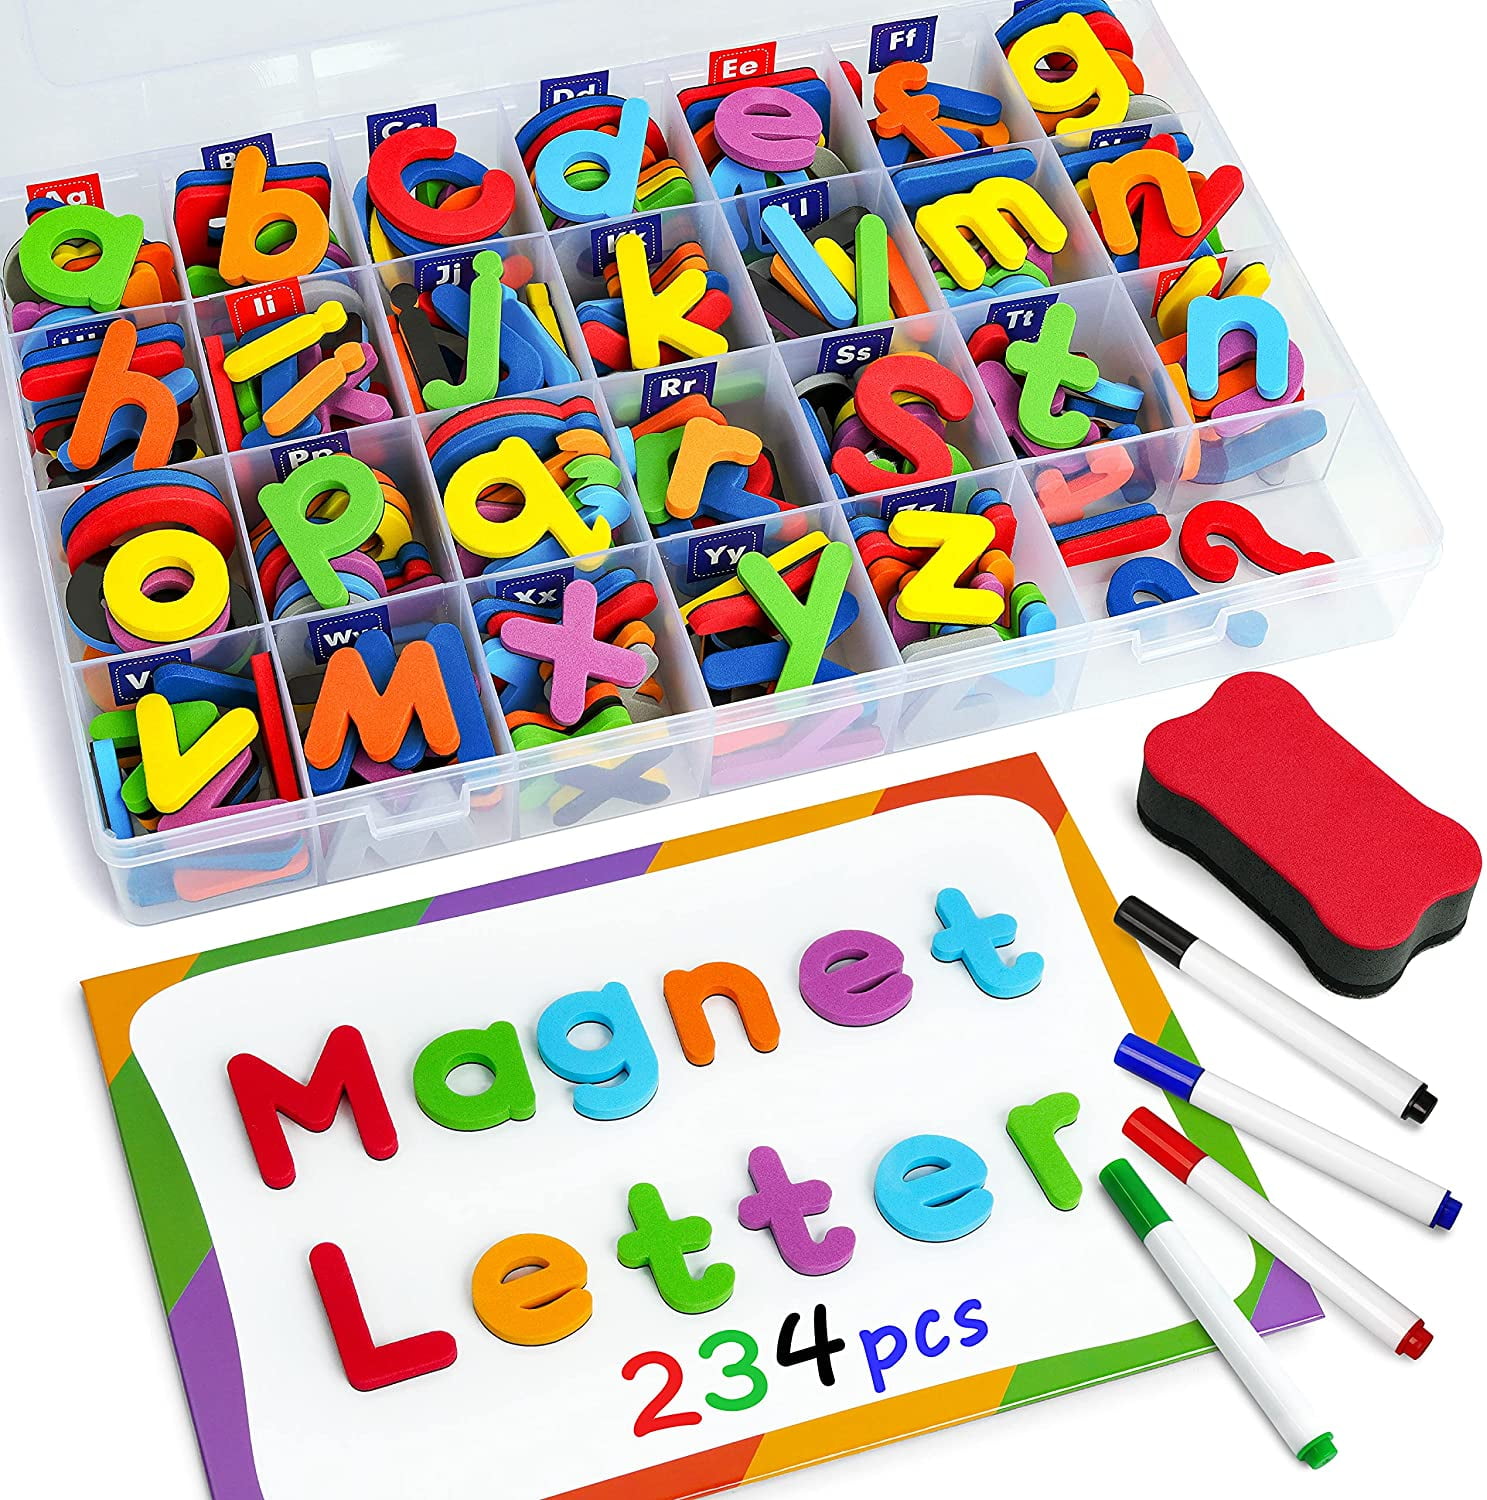 RetailDADDY Magnetic Writing Board With Alphabets & Numbers For Kids  Develope writing skills at an Early Age Educational Board Games Board Game  - Magnetic Writing Board With Alphabets & Numbers For Kids